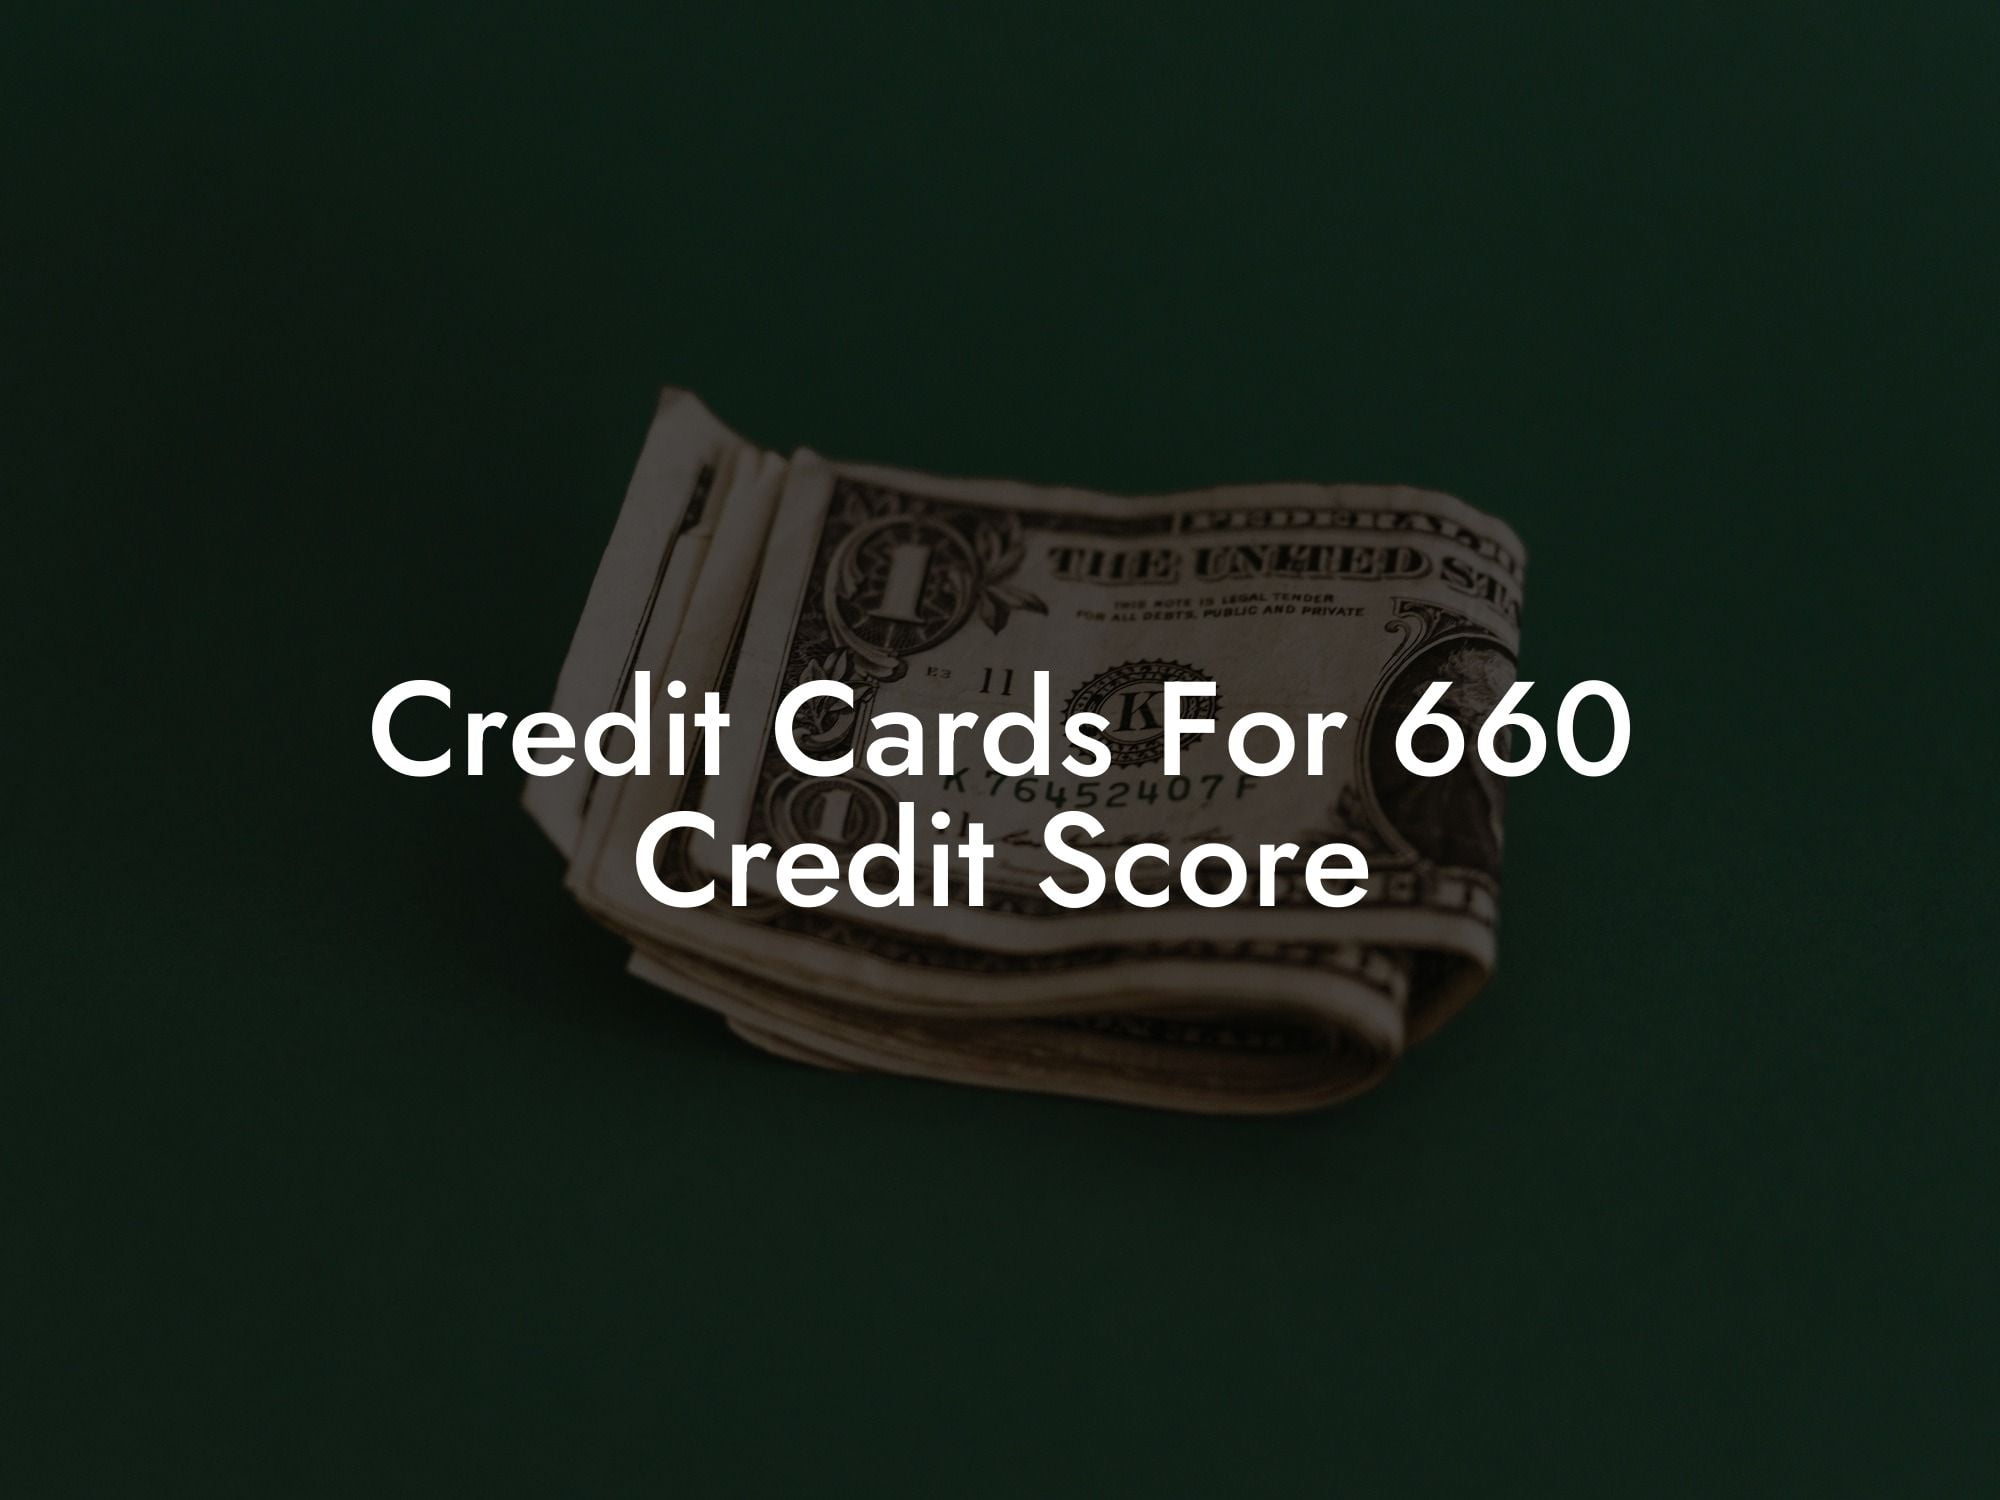 Credit Cards For 660 Credit Score